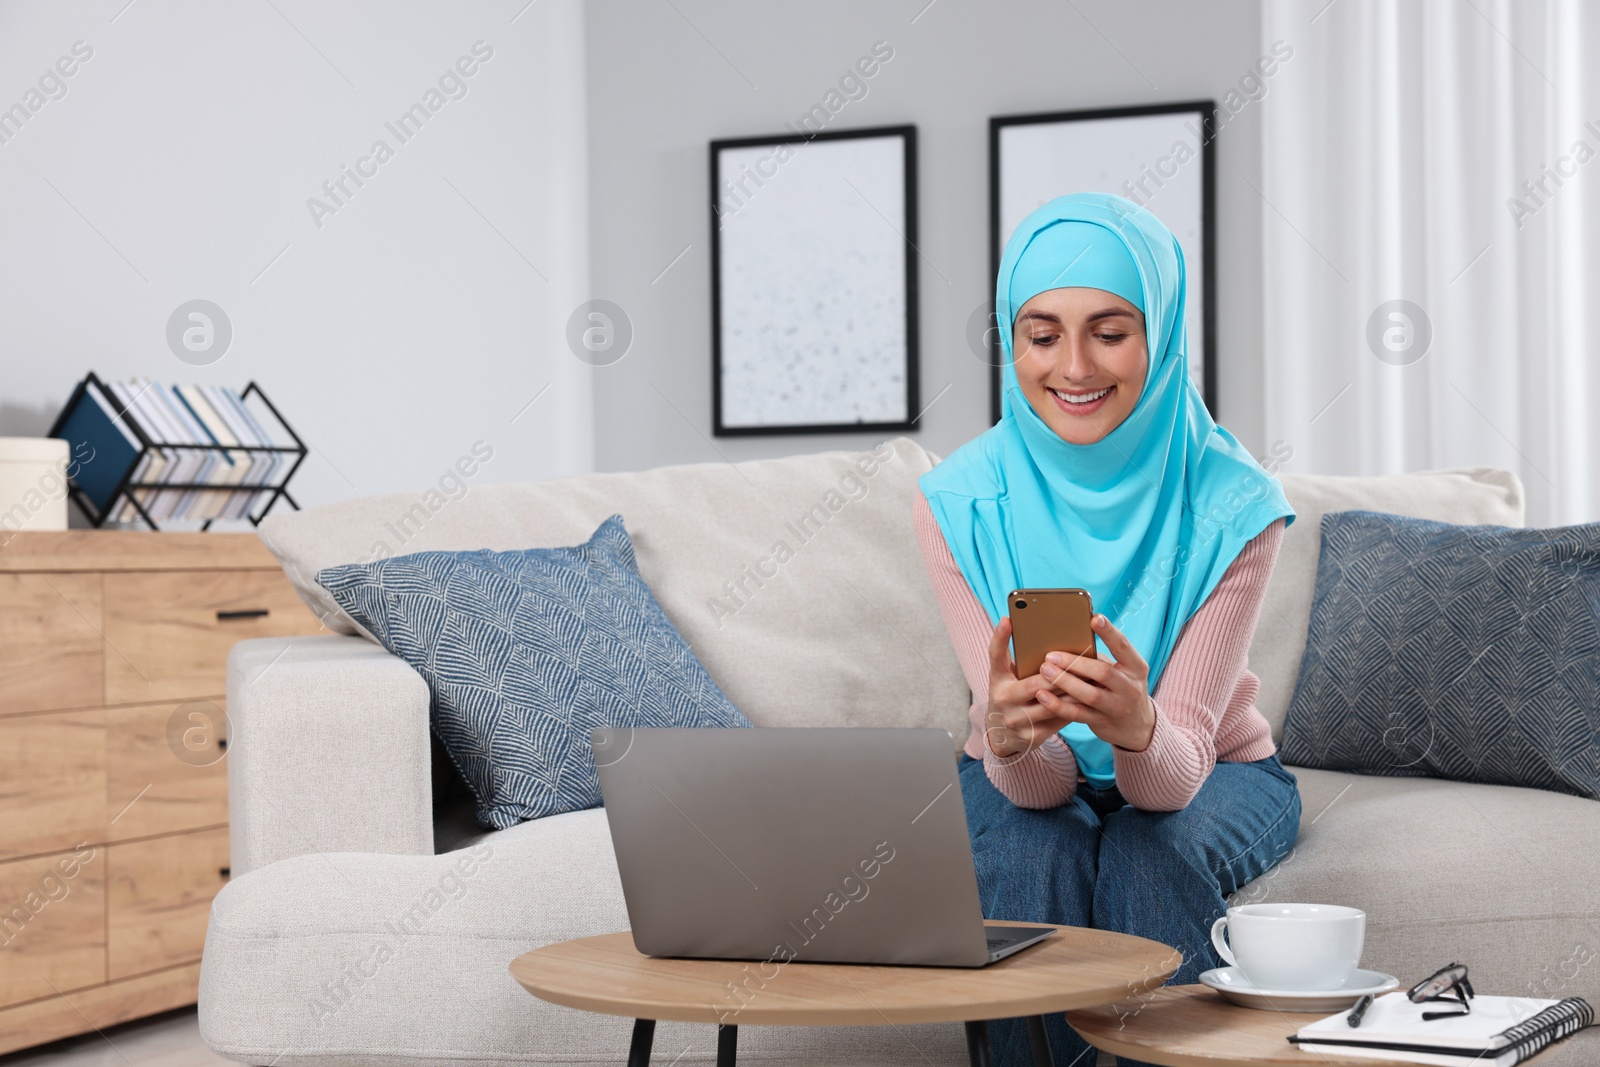 Photo of Muslim woman using smartphone near laptop at couch in room. Space for text